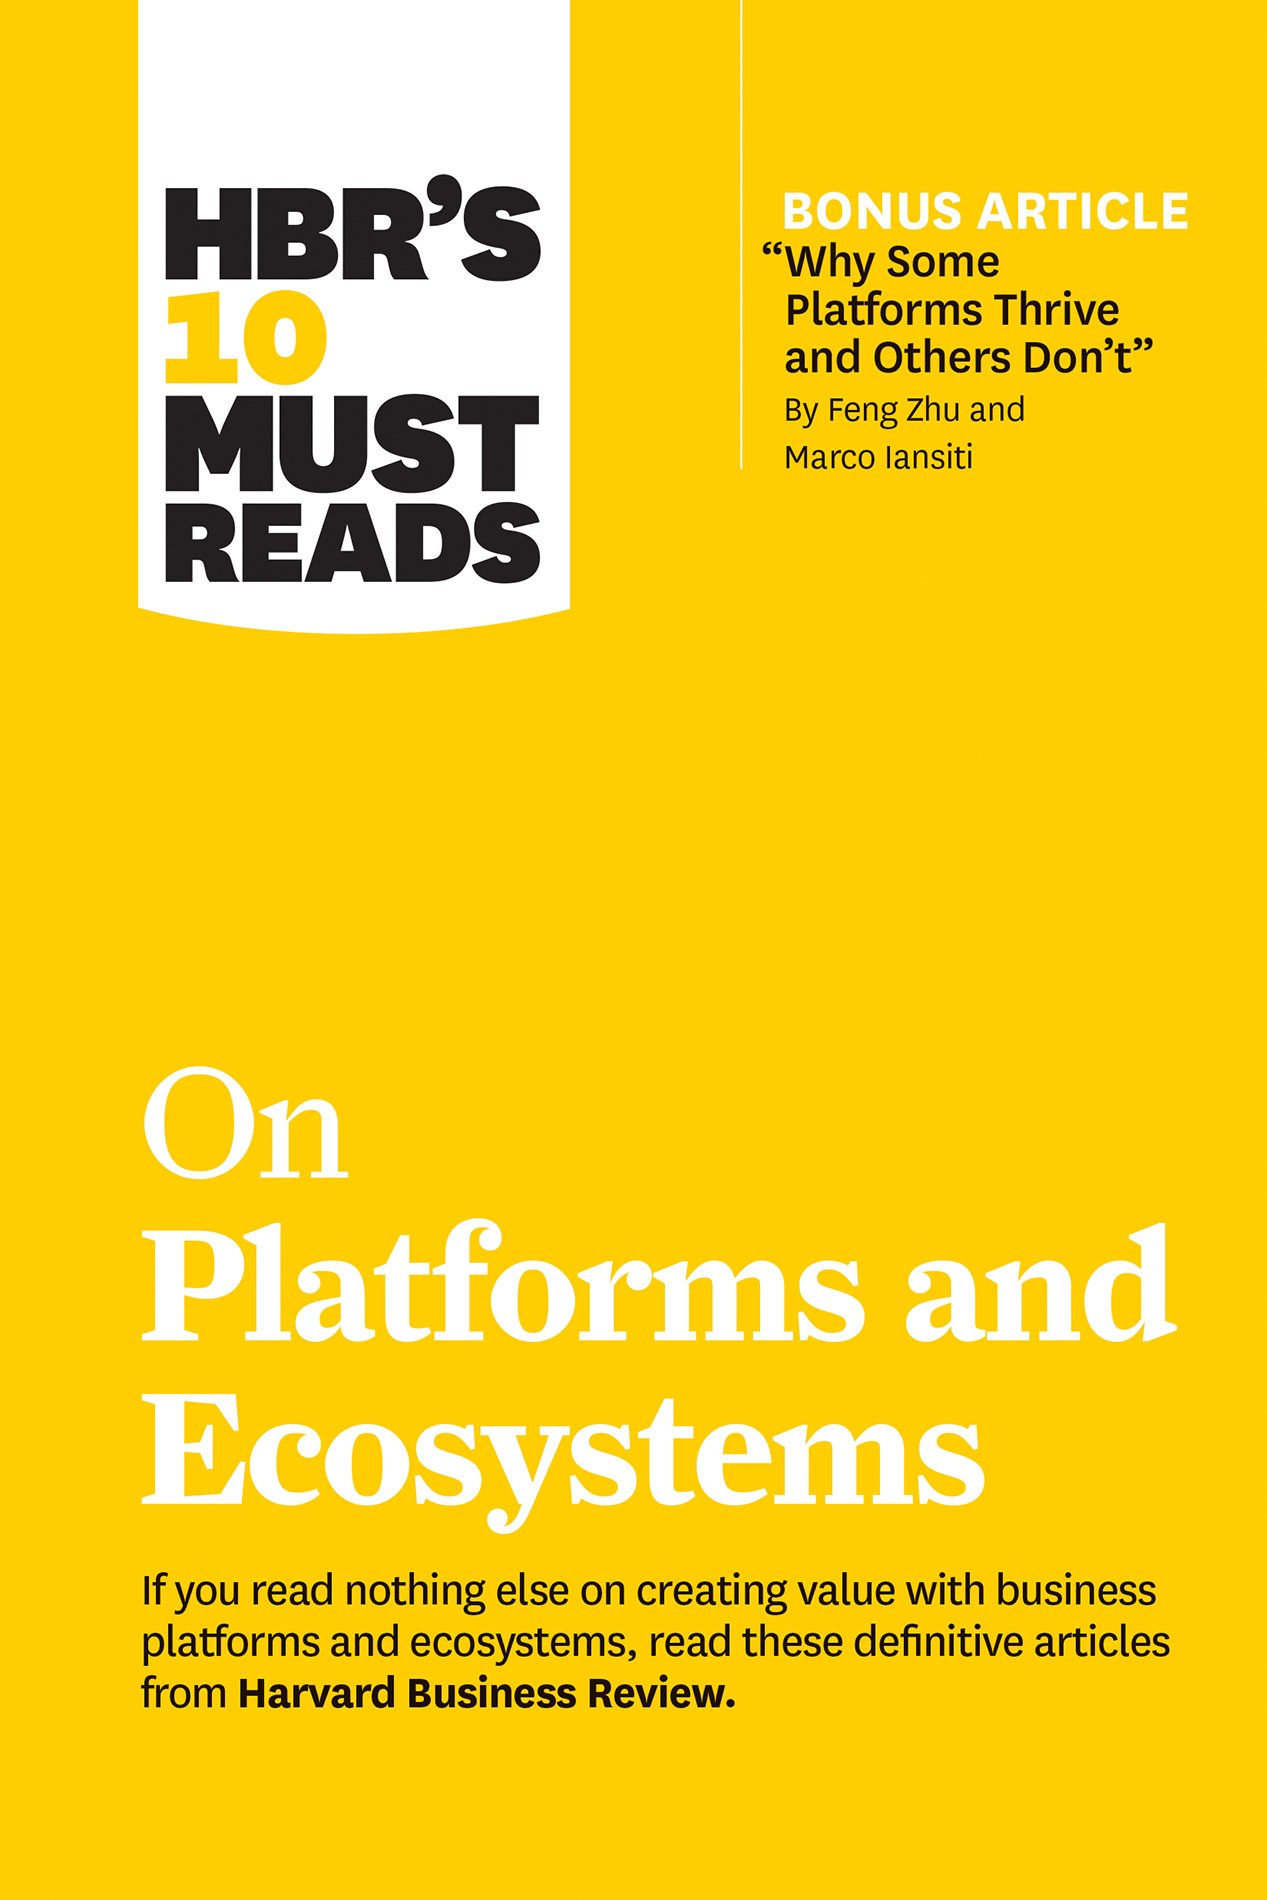 Download HBR's 10 Must Reads on Platforms and Ecosystems (HBR's 10 Must